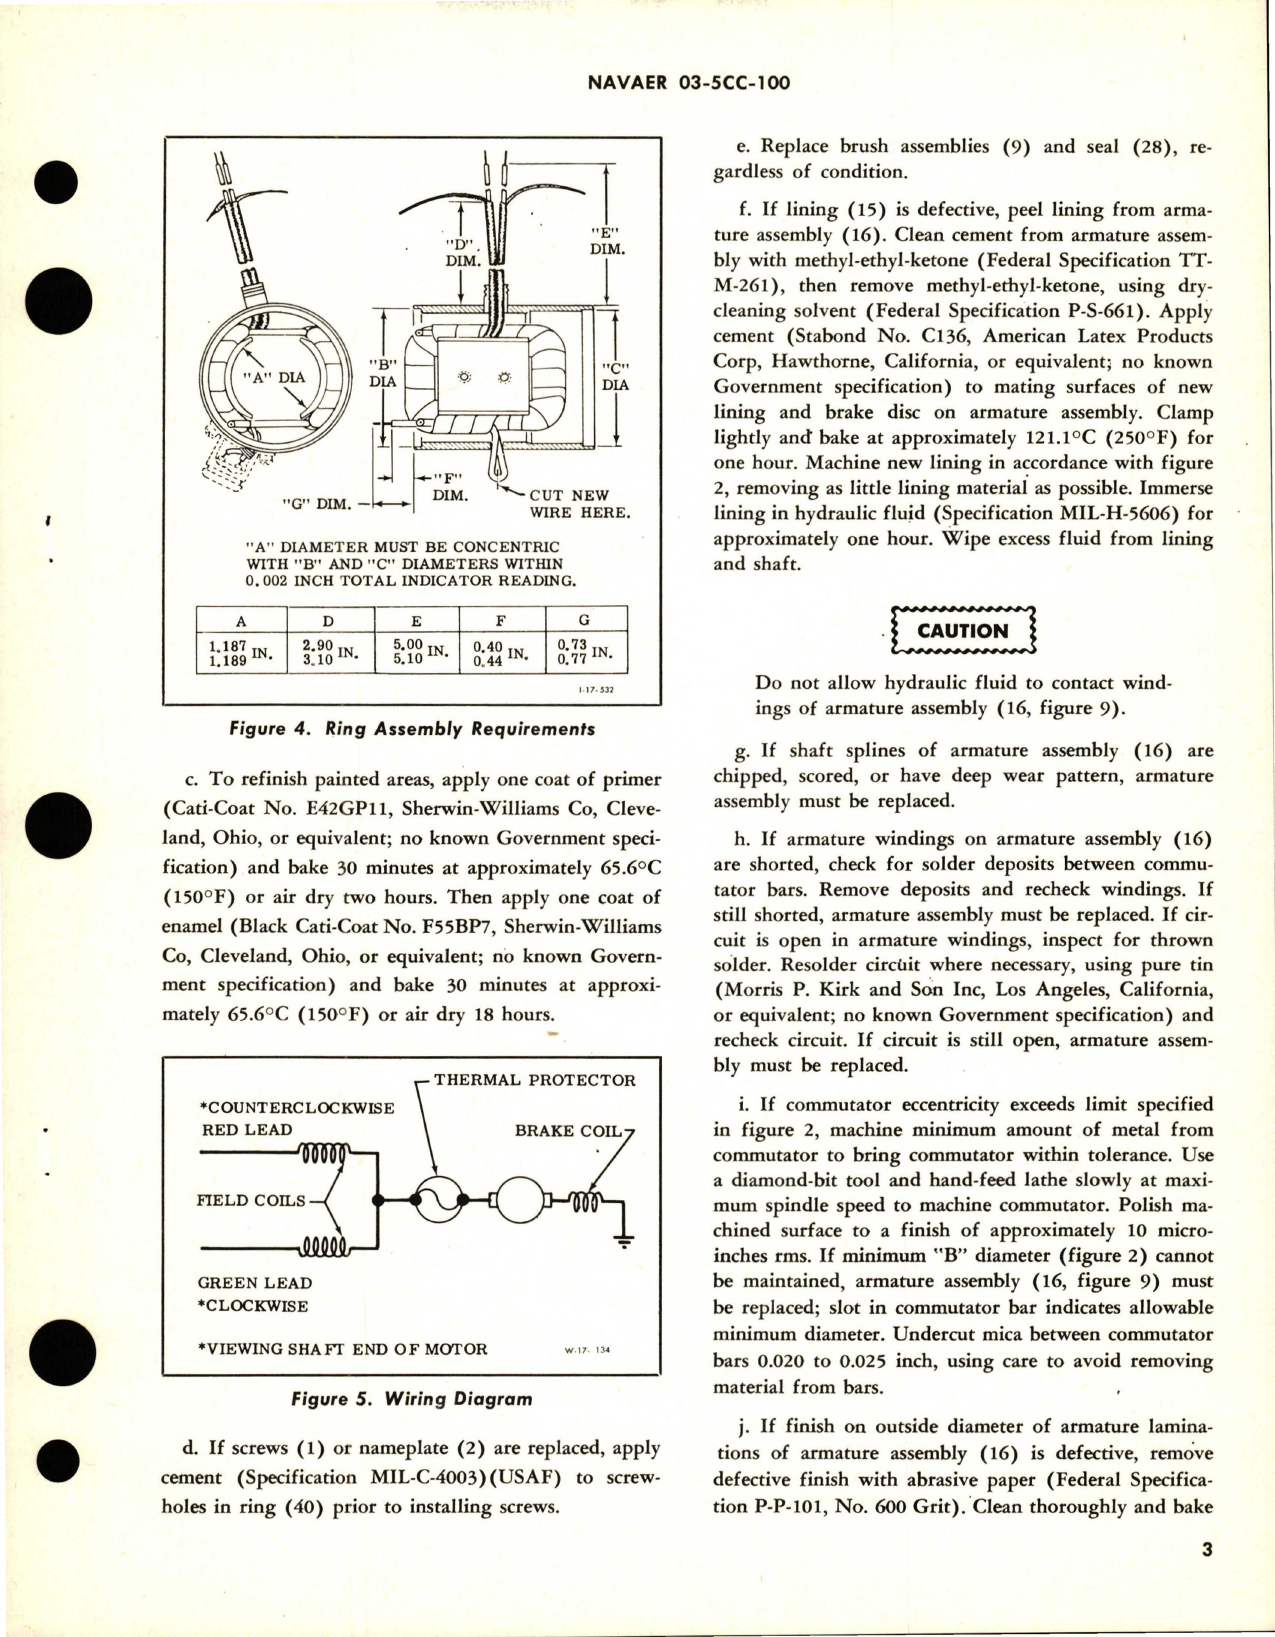 Sample page 5 from AirCorps Library document: Overhaul Instructions with Parts Breakdown for Direct-Current Motor 0.08 HP 26 Volt - Part 26300